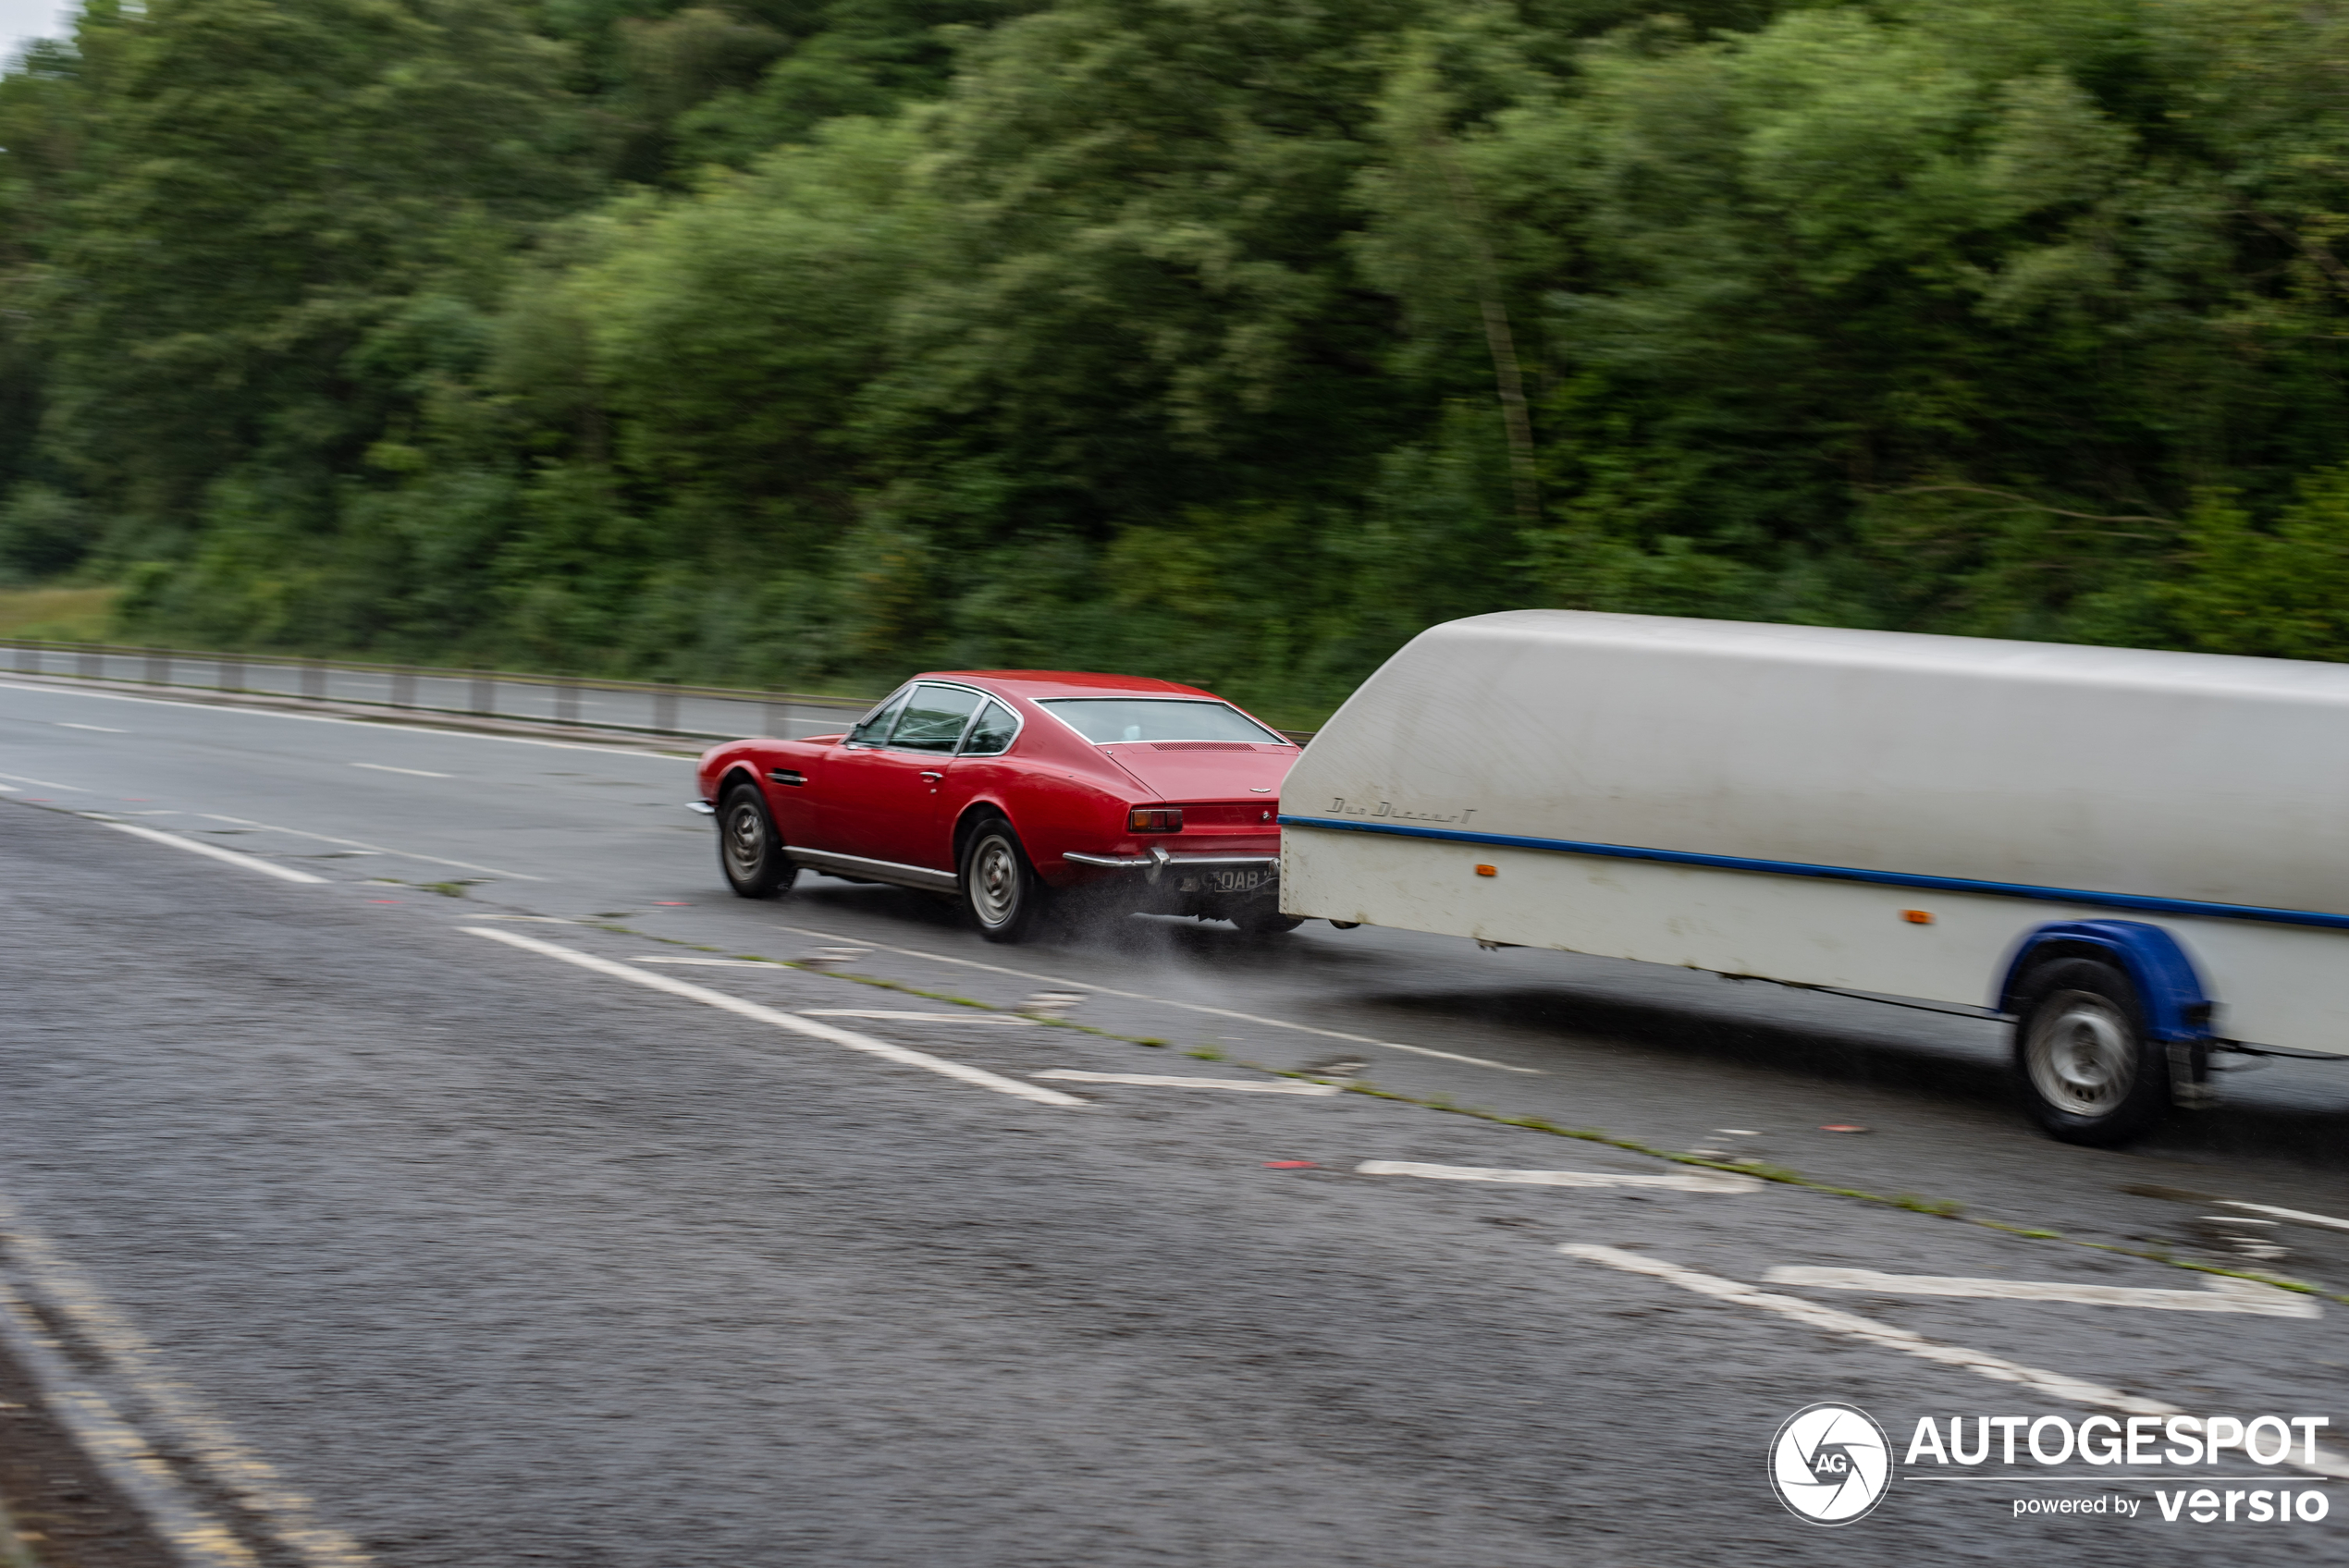 An old DBS with a trailer drives on the highway